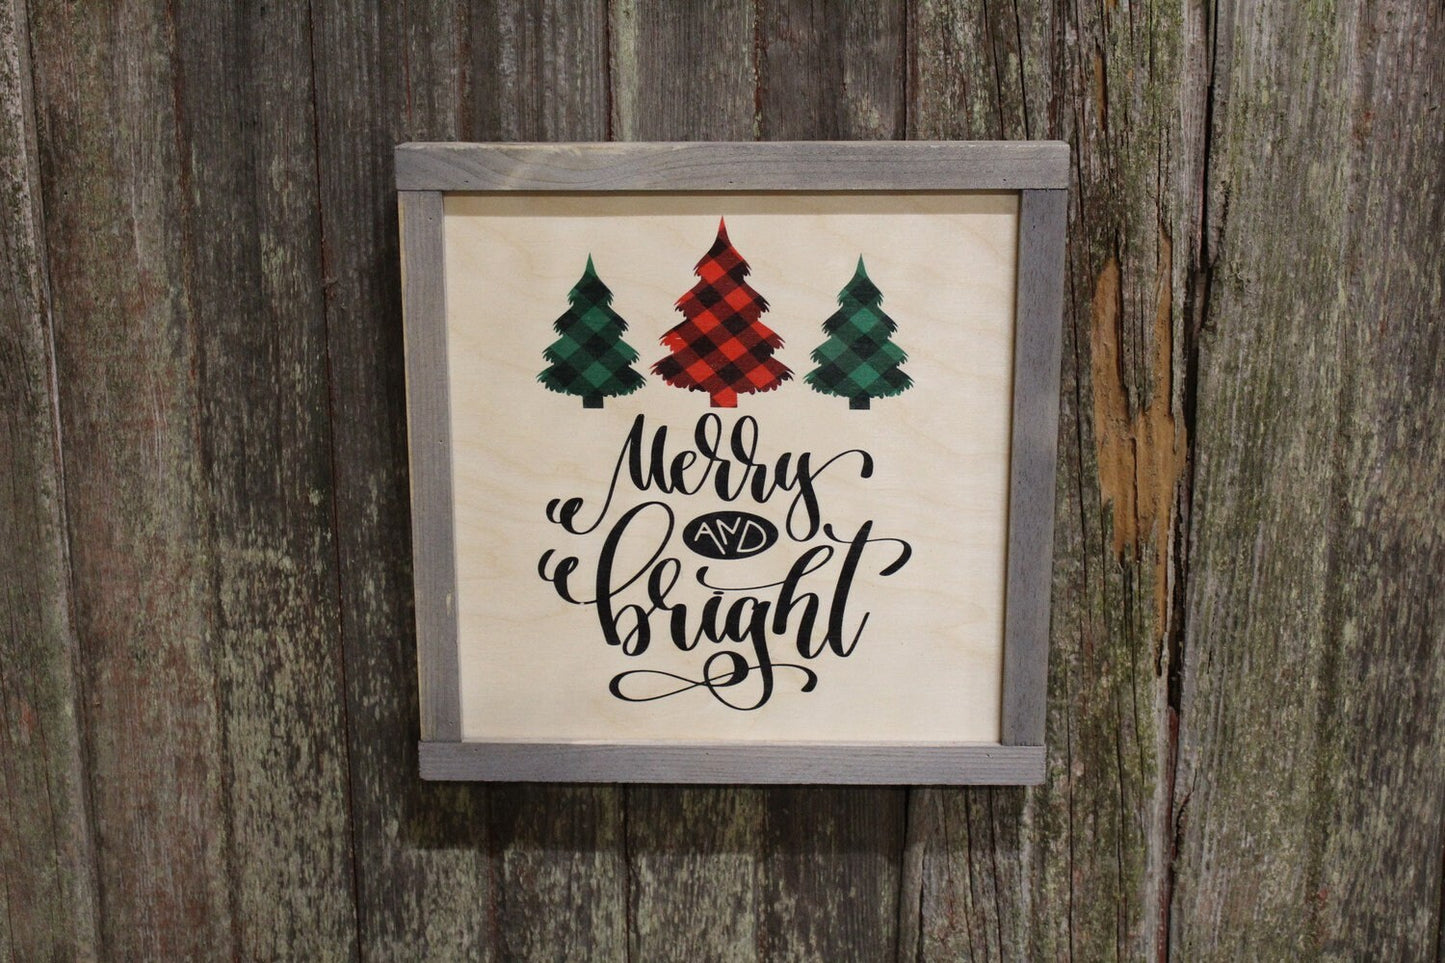 Framed Merry and Bright Wood Sign Script Text Pallet Sign Plaid Christmas Tree Decor Print Wall Art Decoration Wall Hanging Red Green Rustic